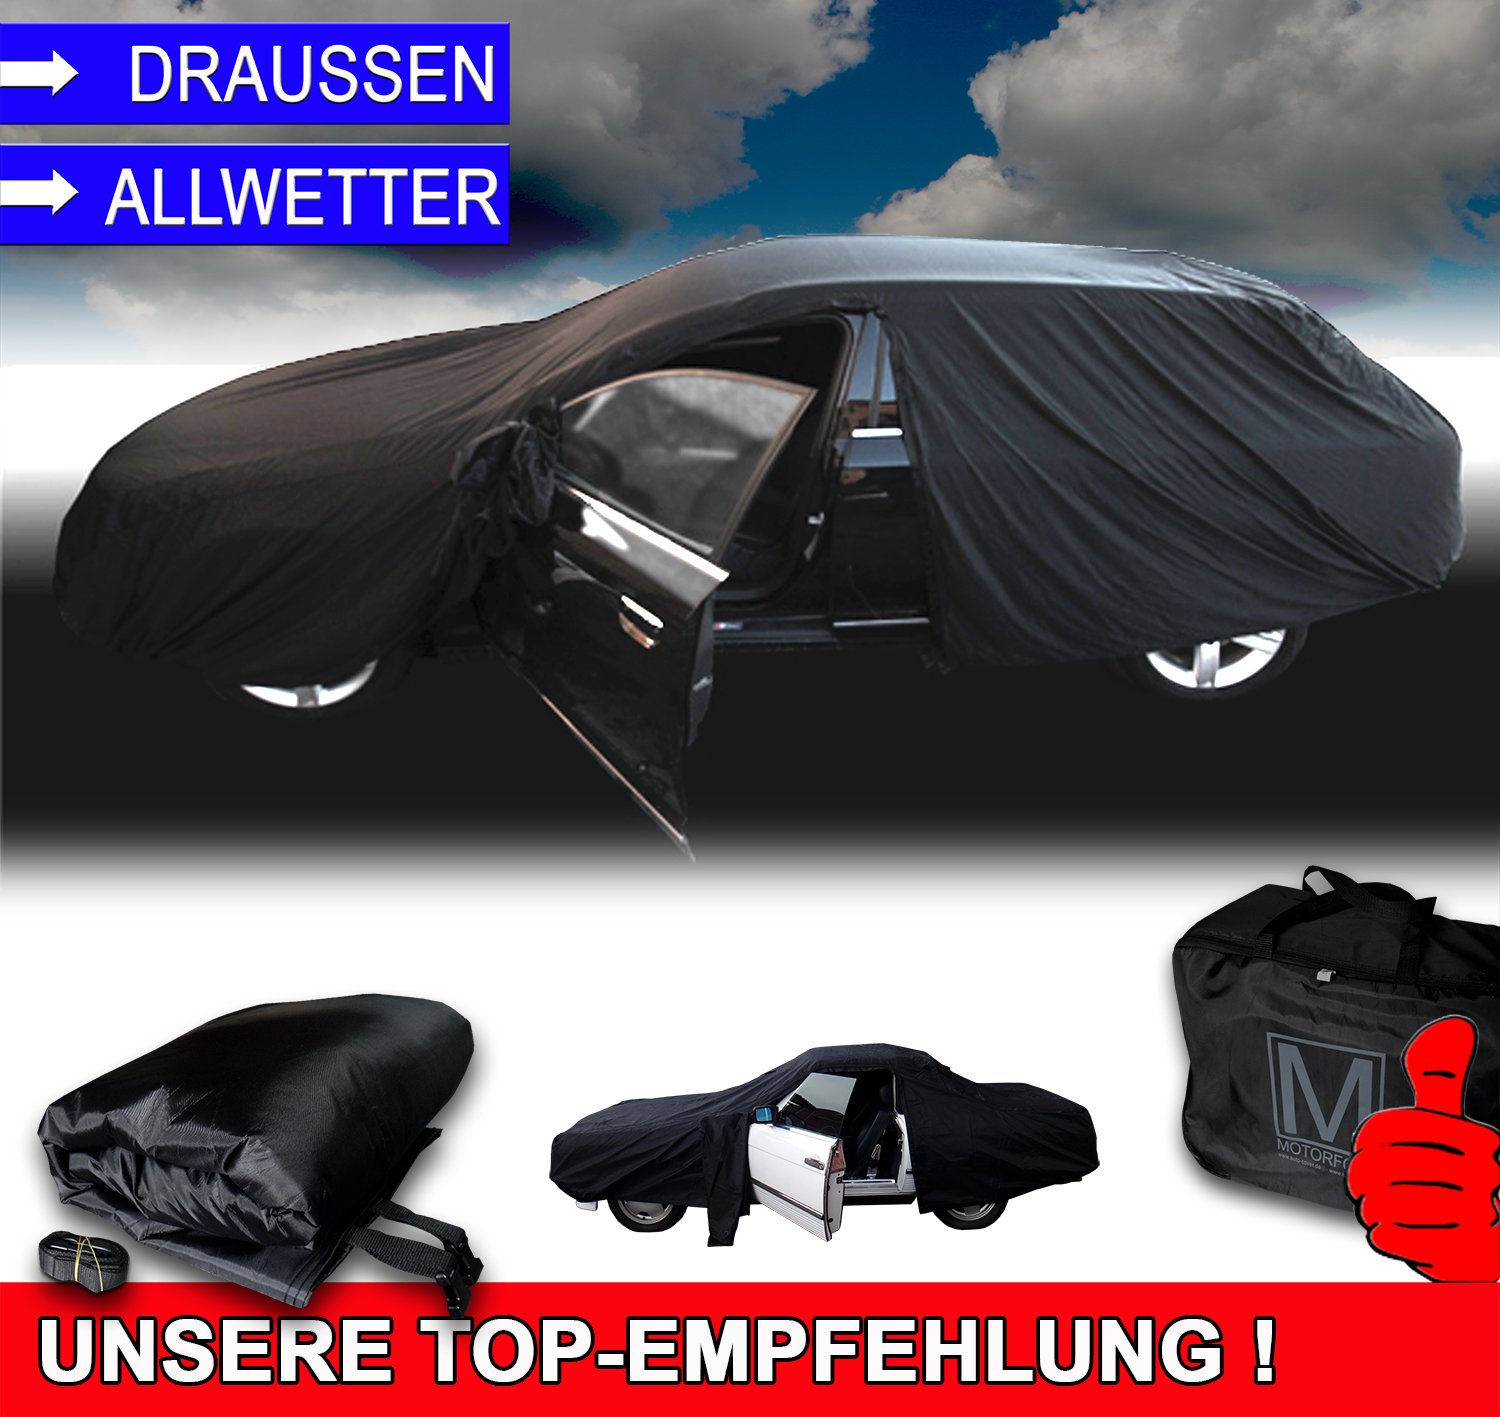 Optimo Outdoor Car Cover for Audi 80 / 90 80 Avant